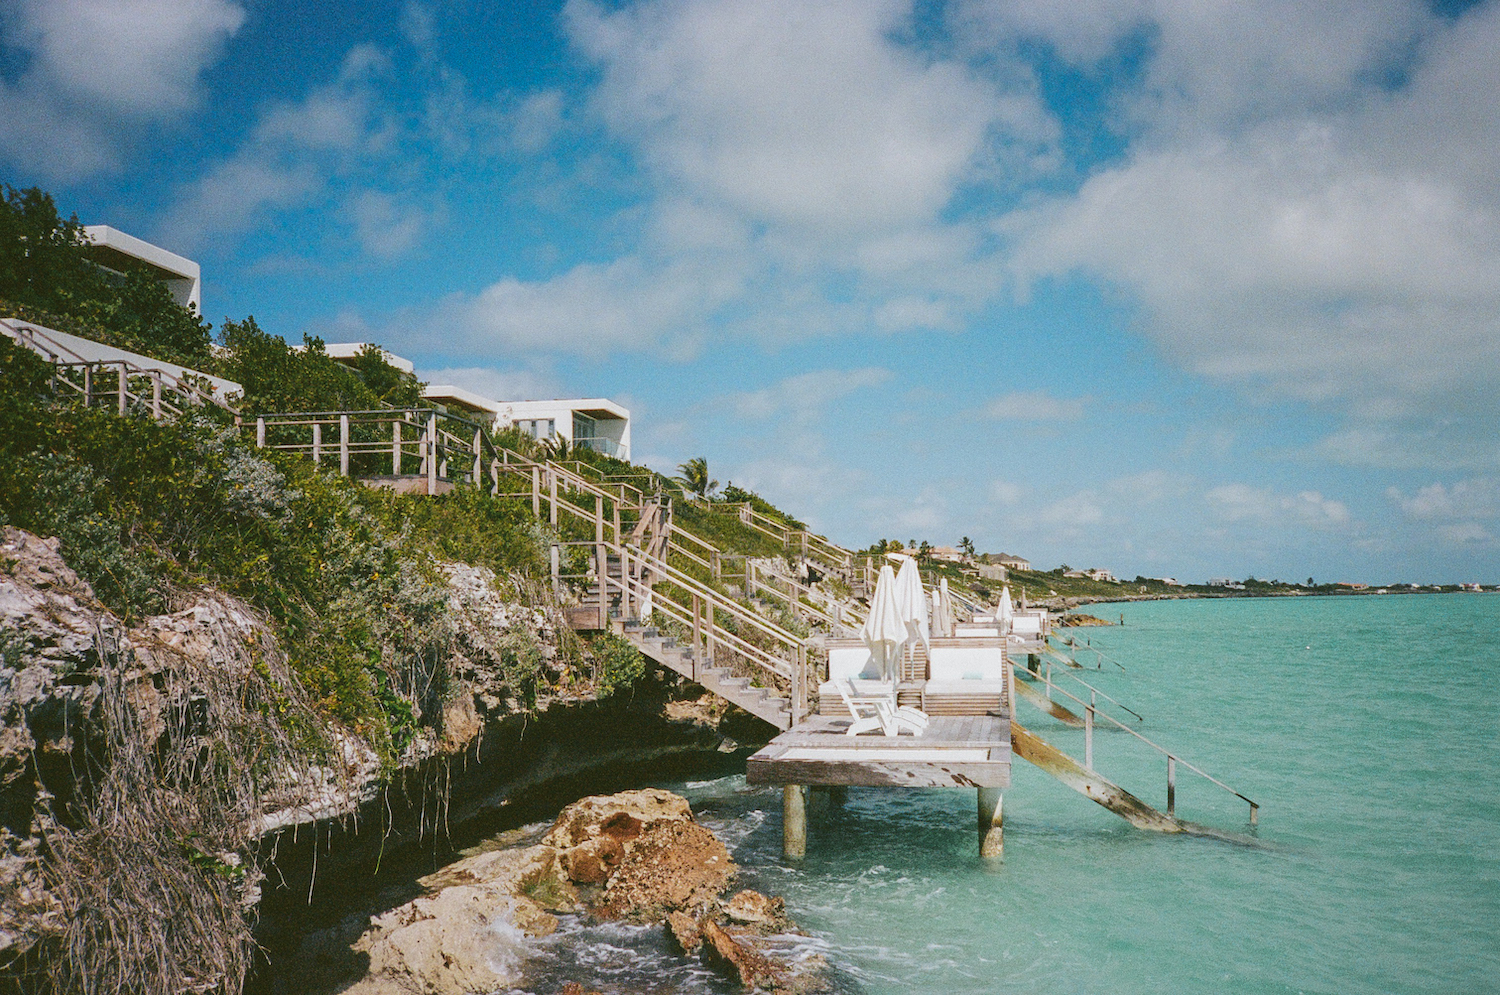 a string of villas perched on cliffs on the caribbean sea